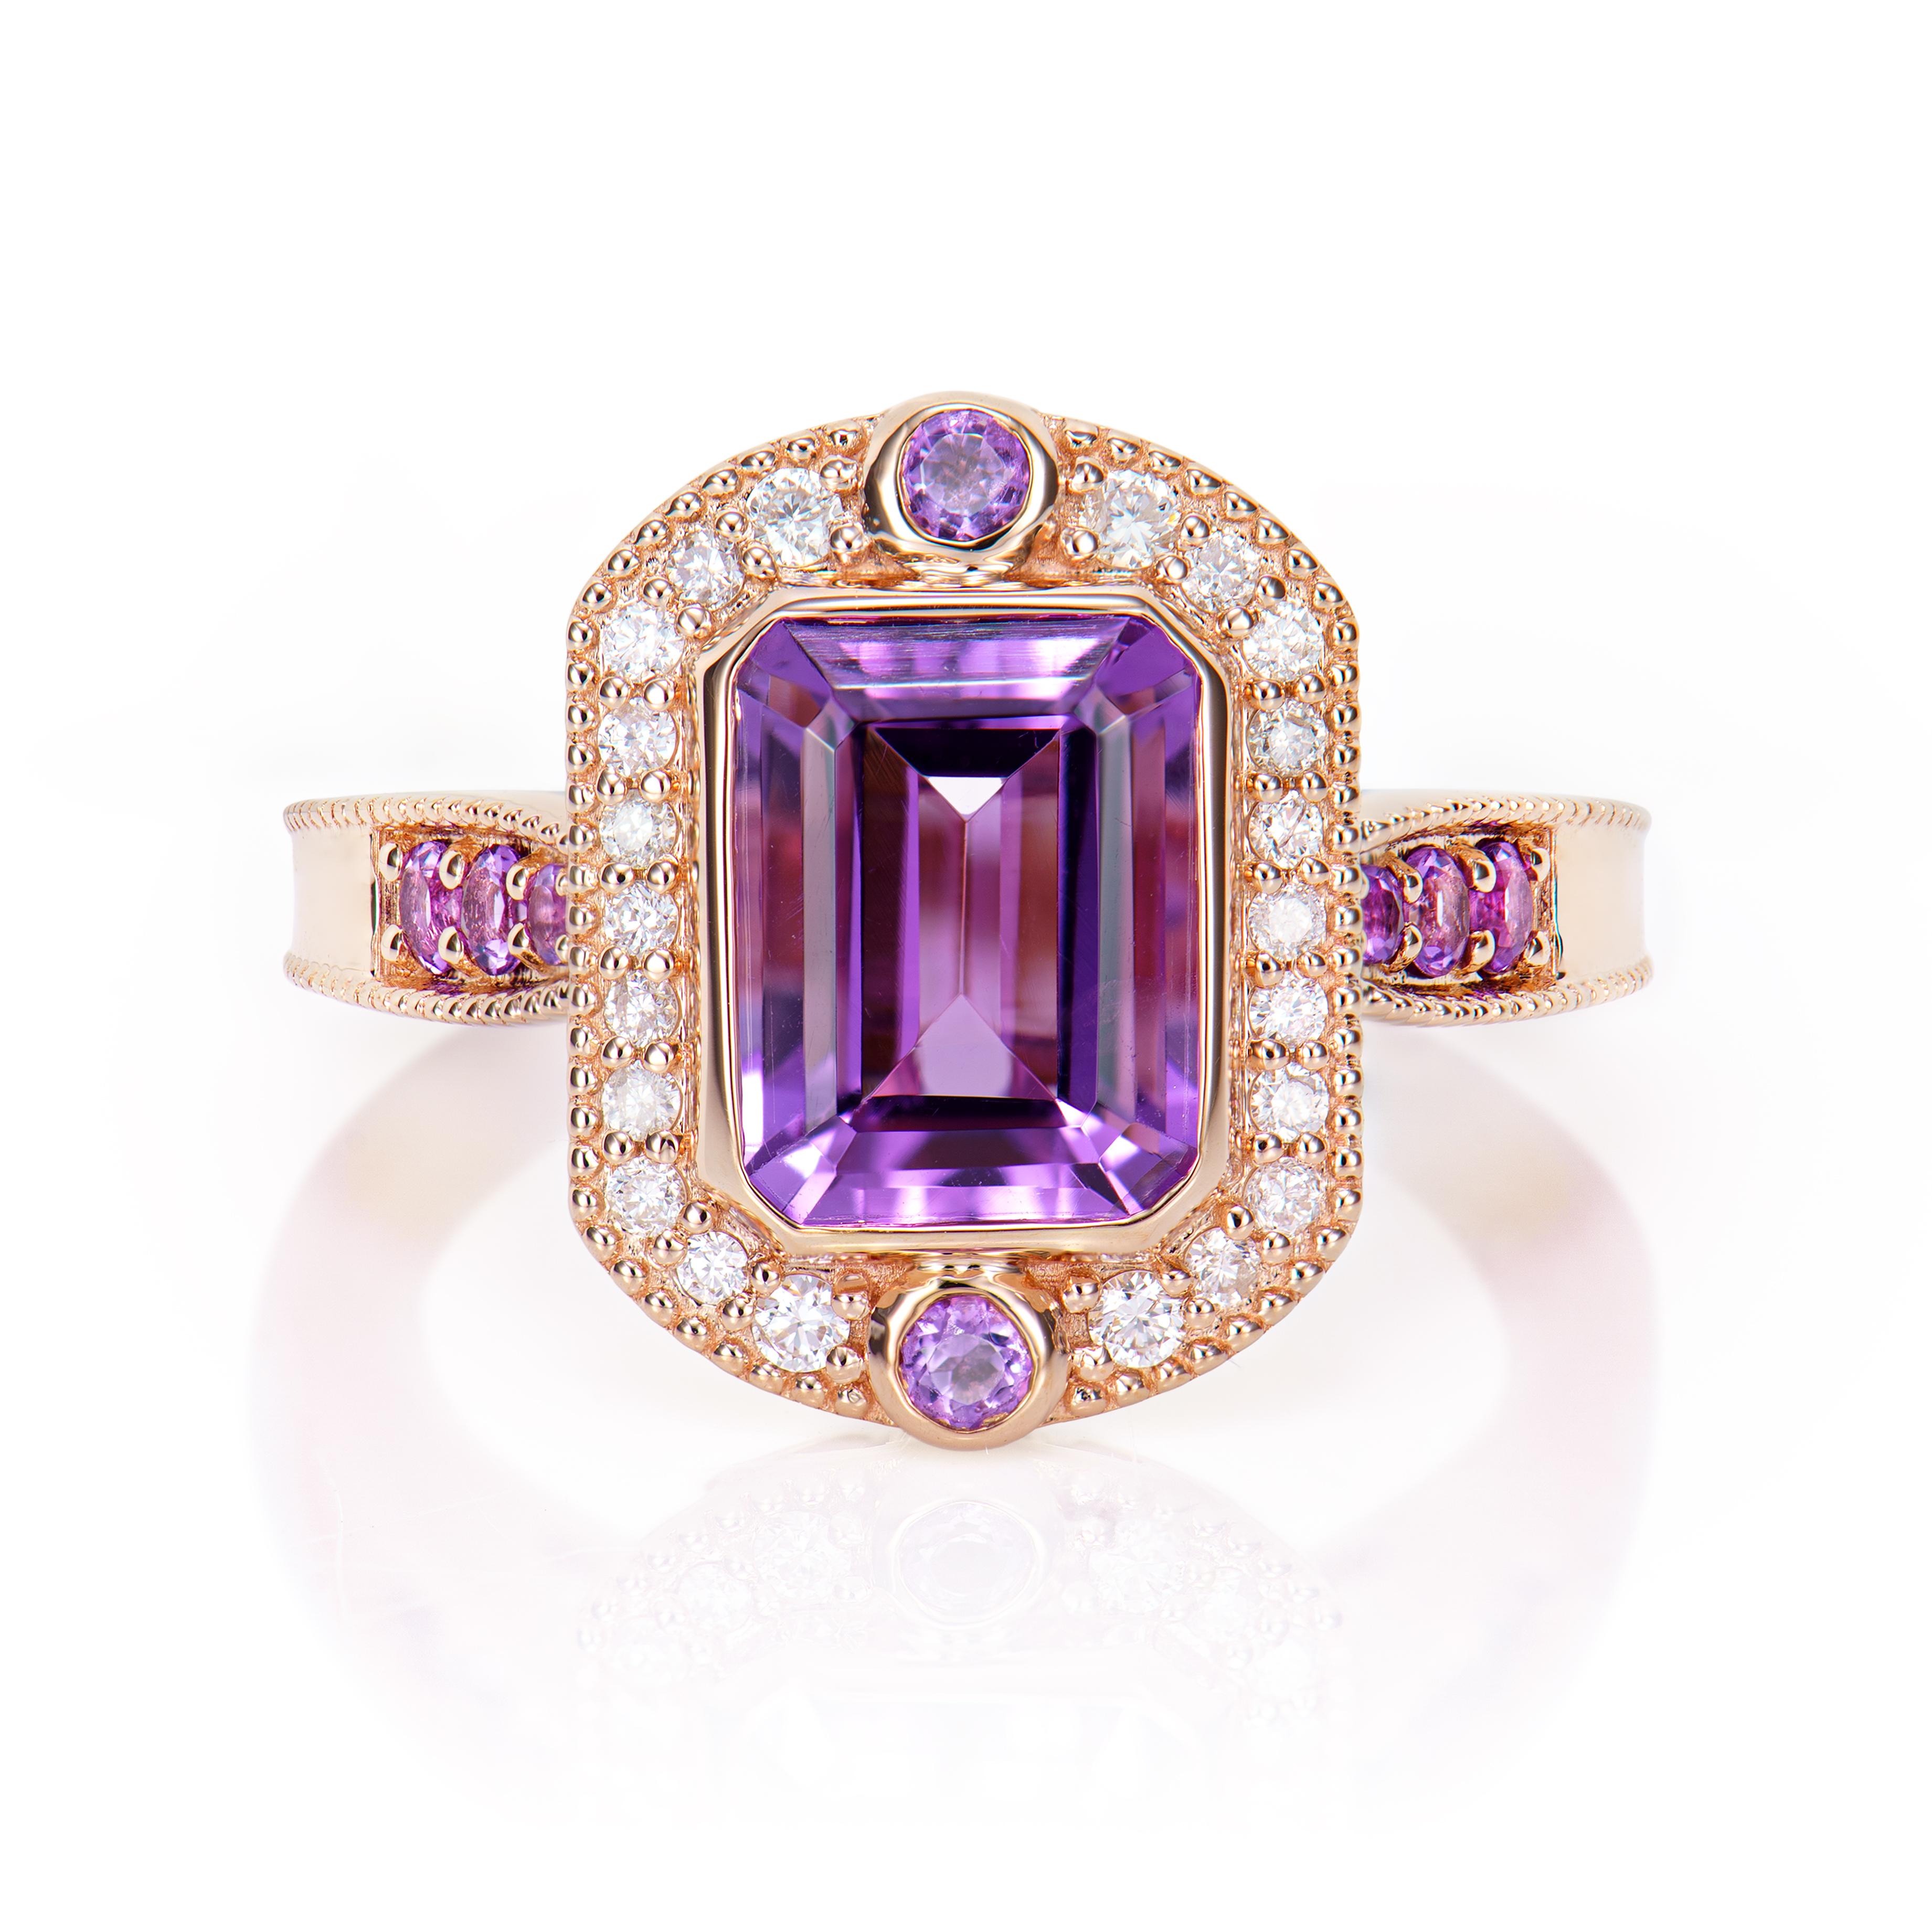 Contemporary 2.20 Carat Amethyst Fancy Ring in 14Karat Rose Gold with White Diamond.   For Sale